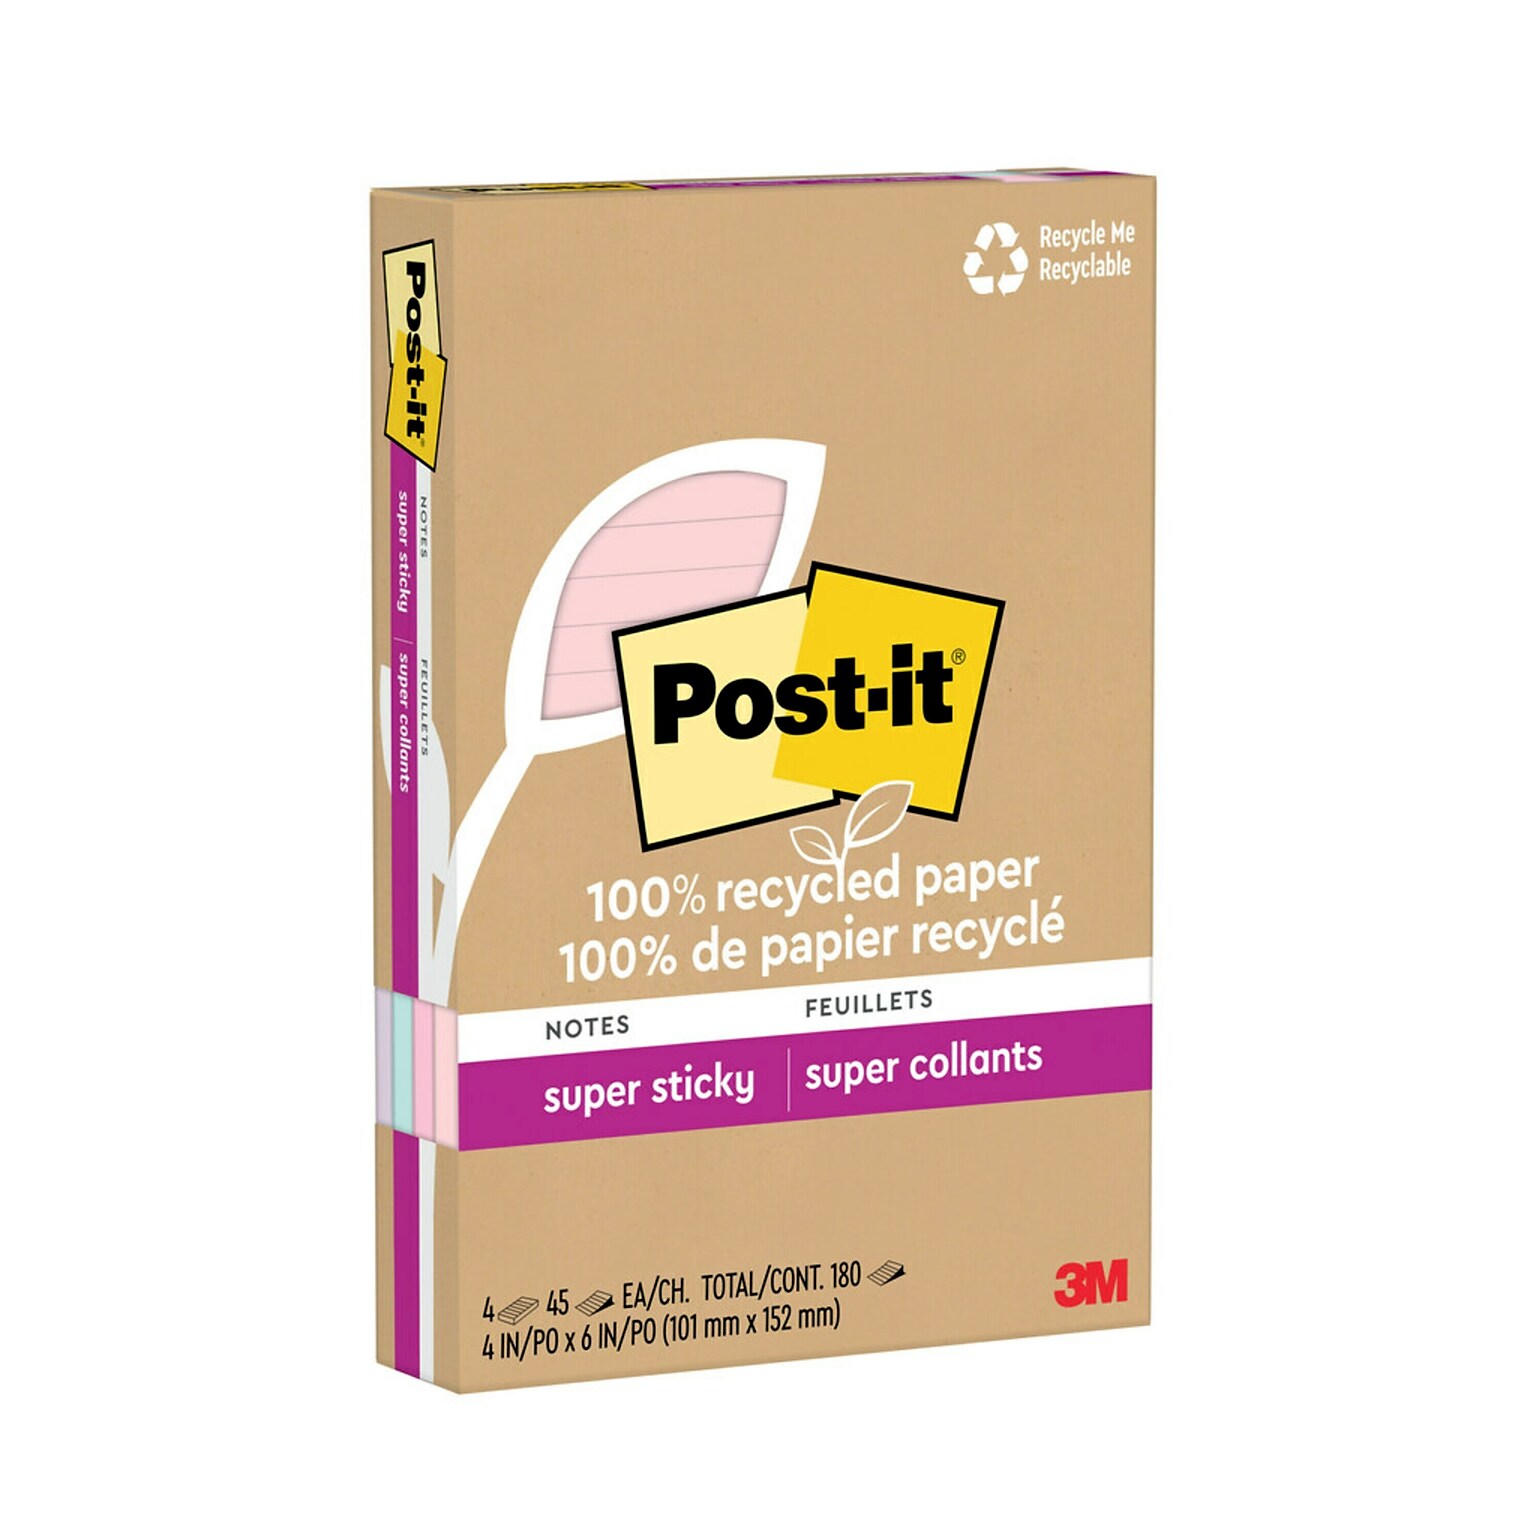 Post-it Recycled Super Sticky Notes, 4 x 6, Wanderlust Pastels Collection, 45 Sheet/Pad, 4 Pads/Pack (4621R-4SSNRP)